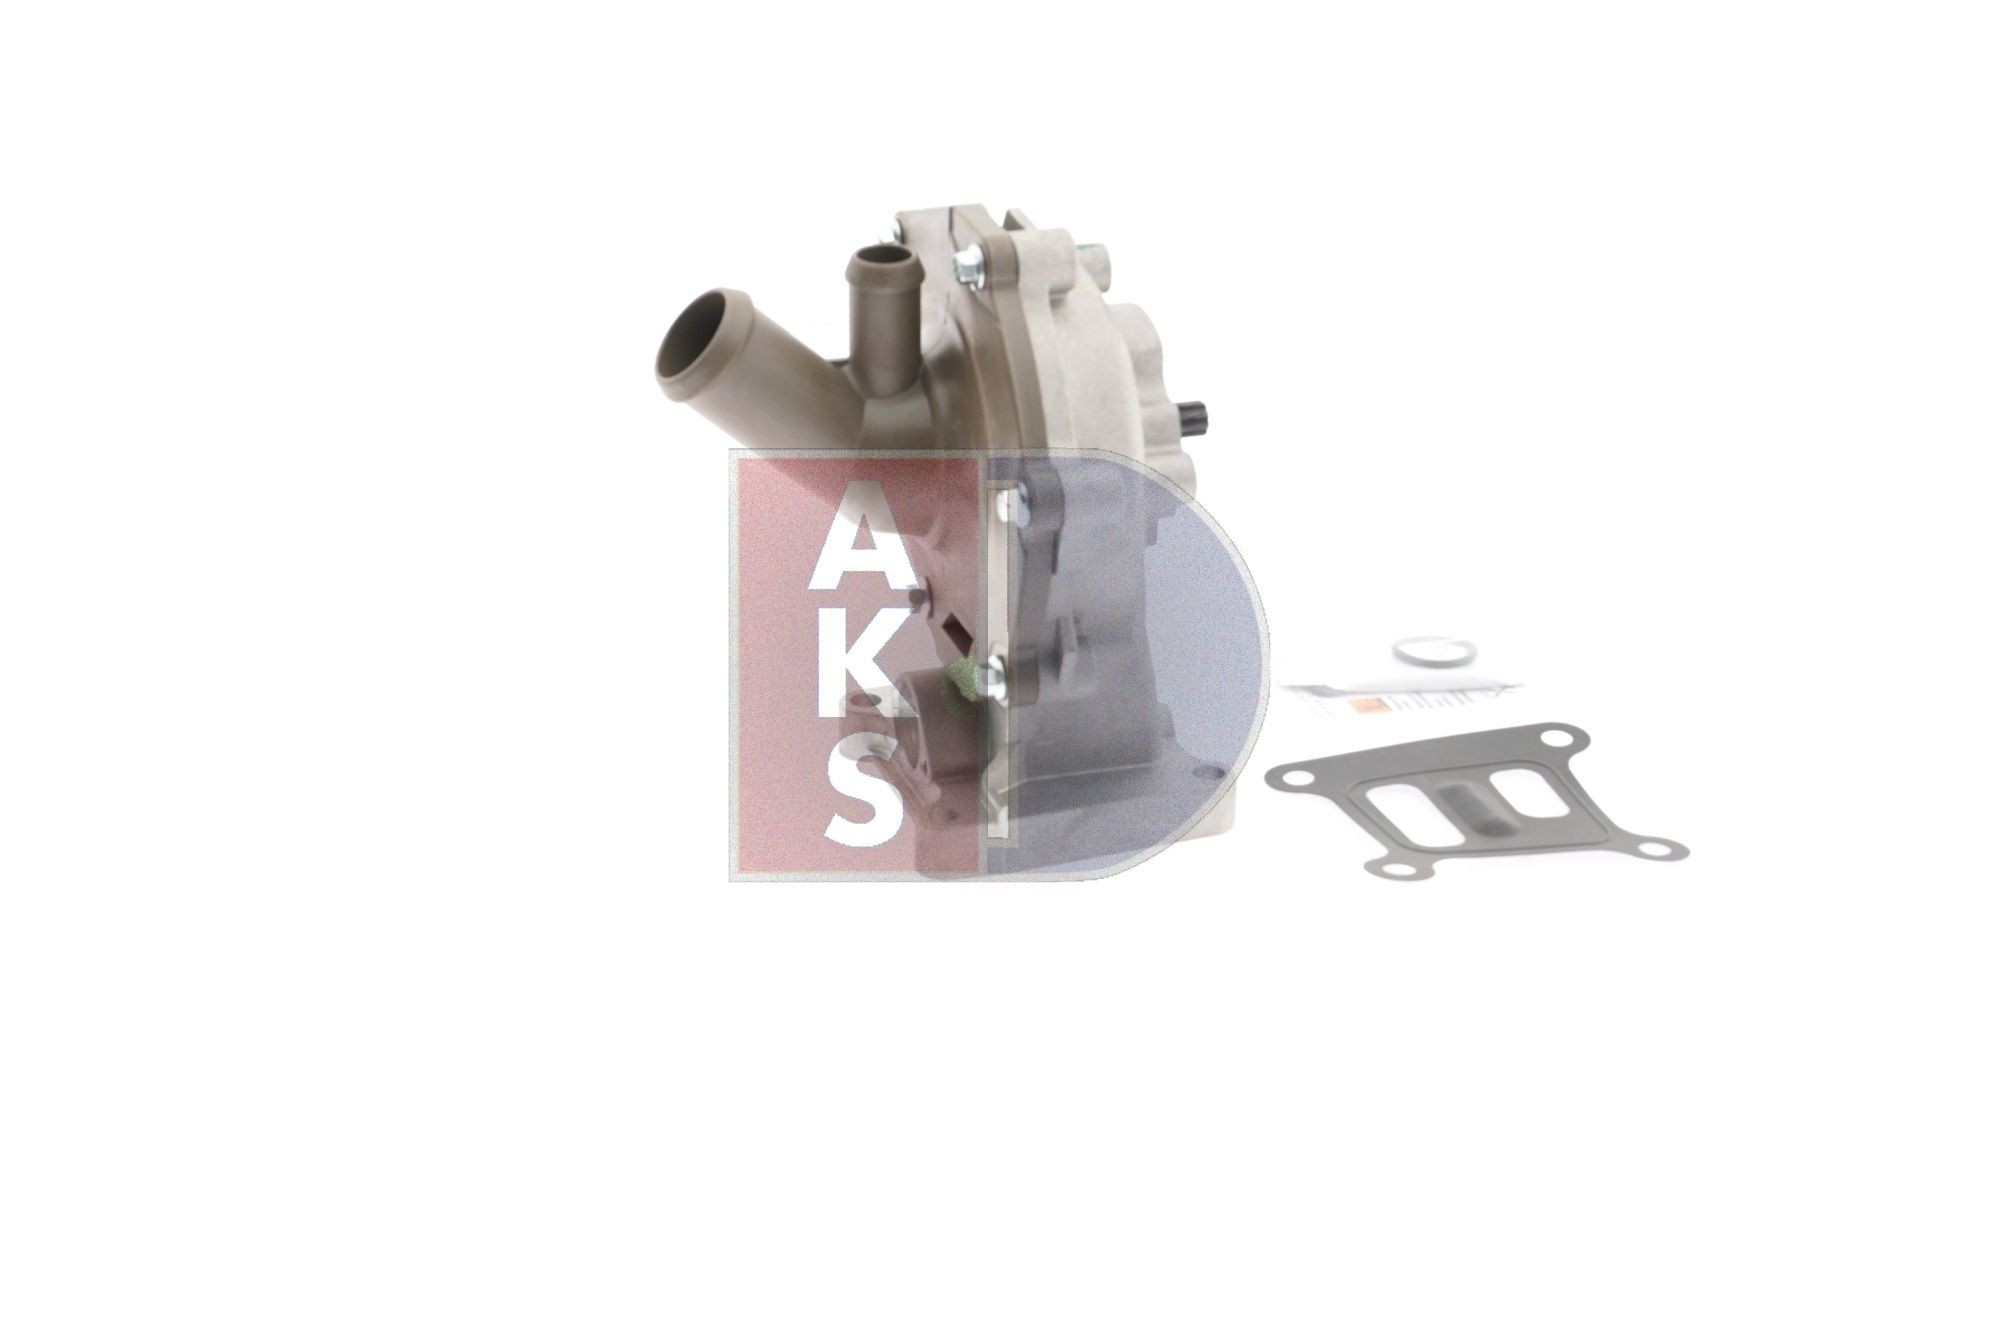 Air conditioning compressor 850353N from AKS DASIS